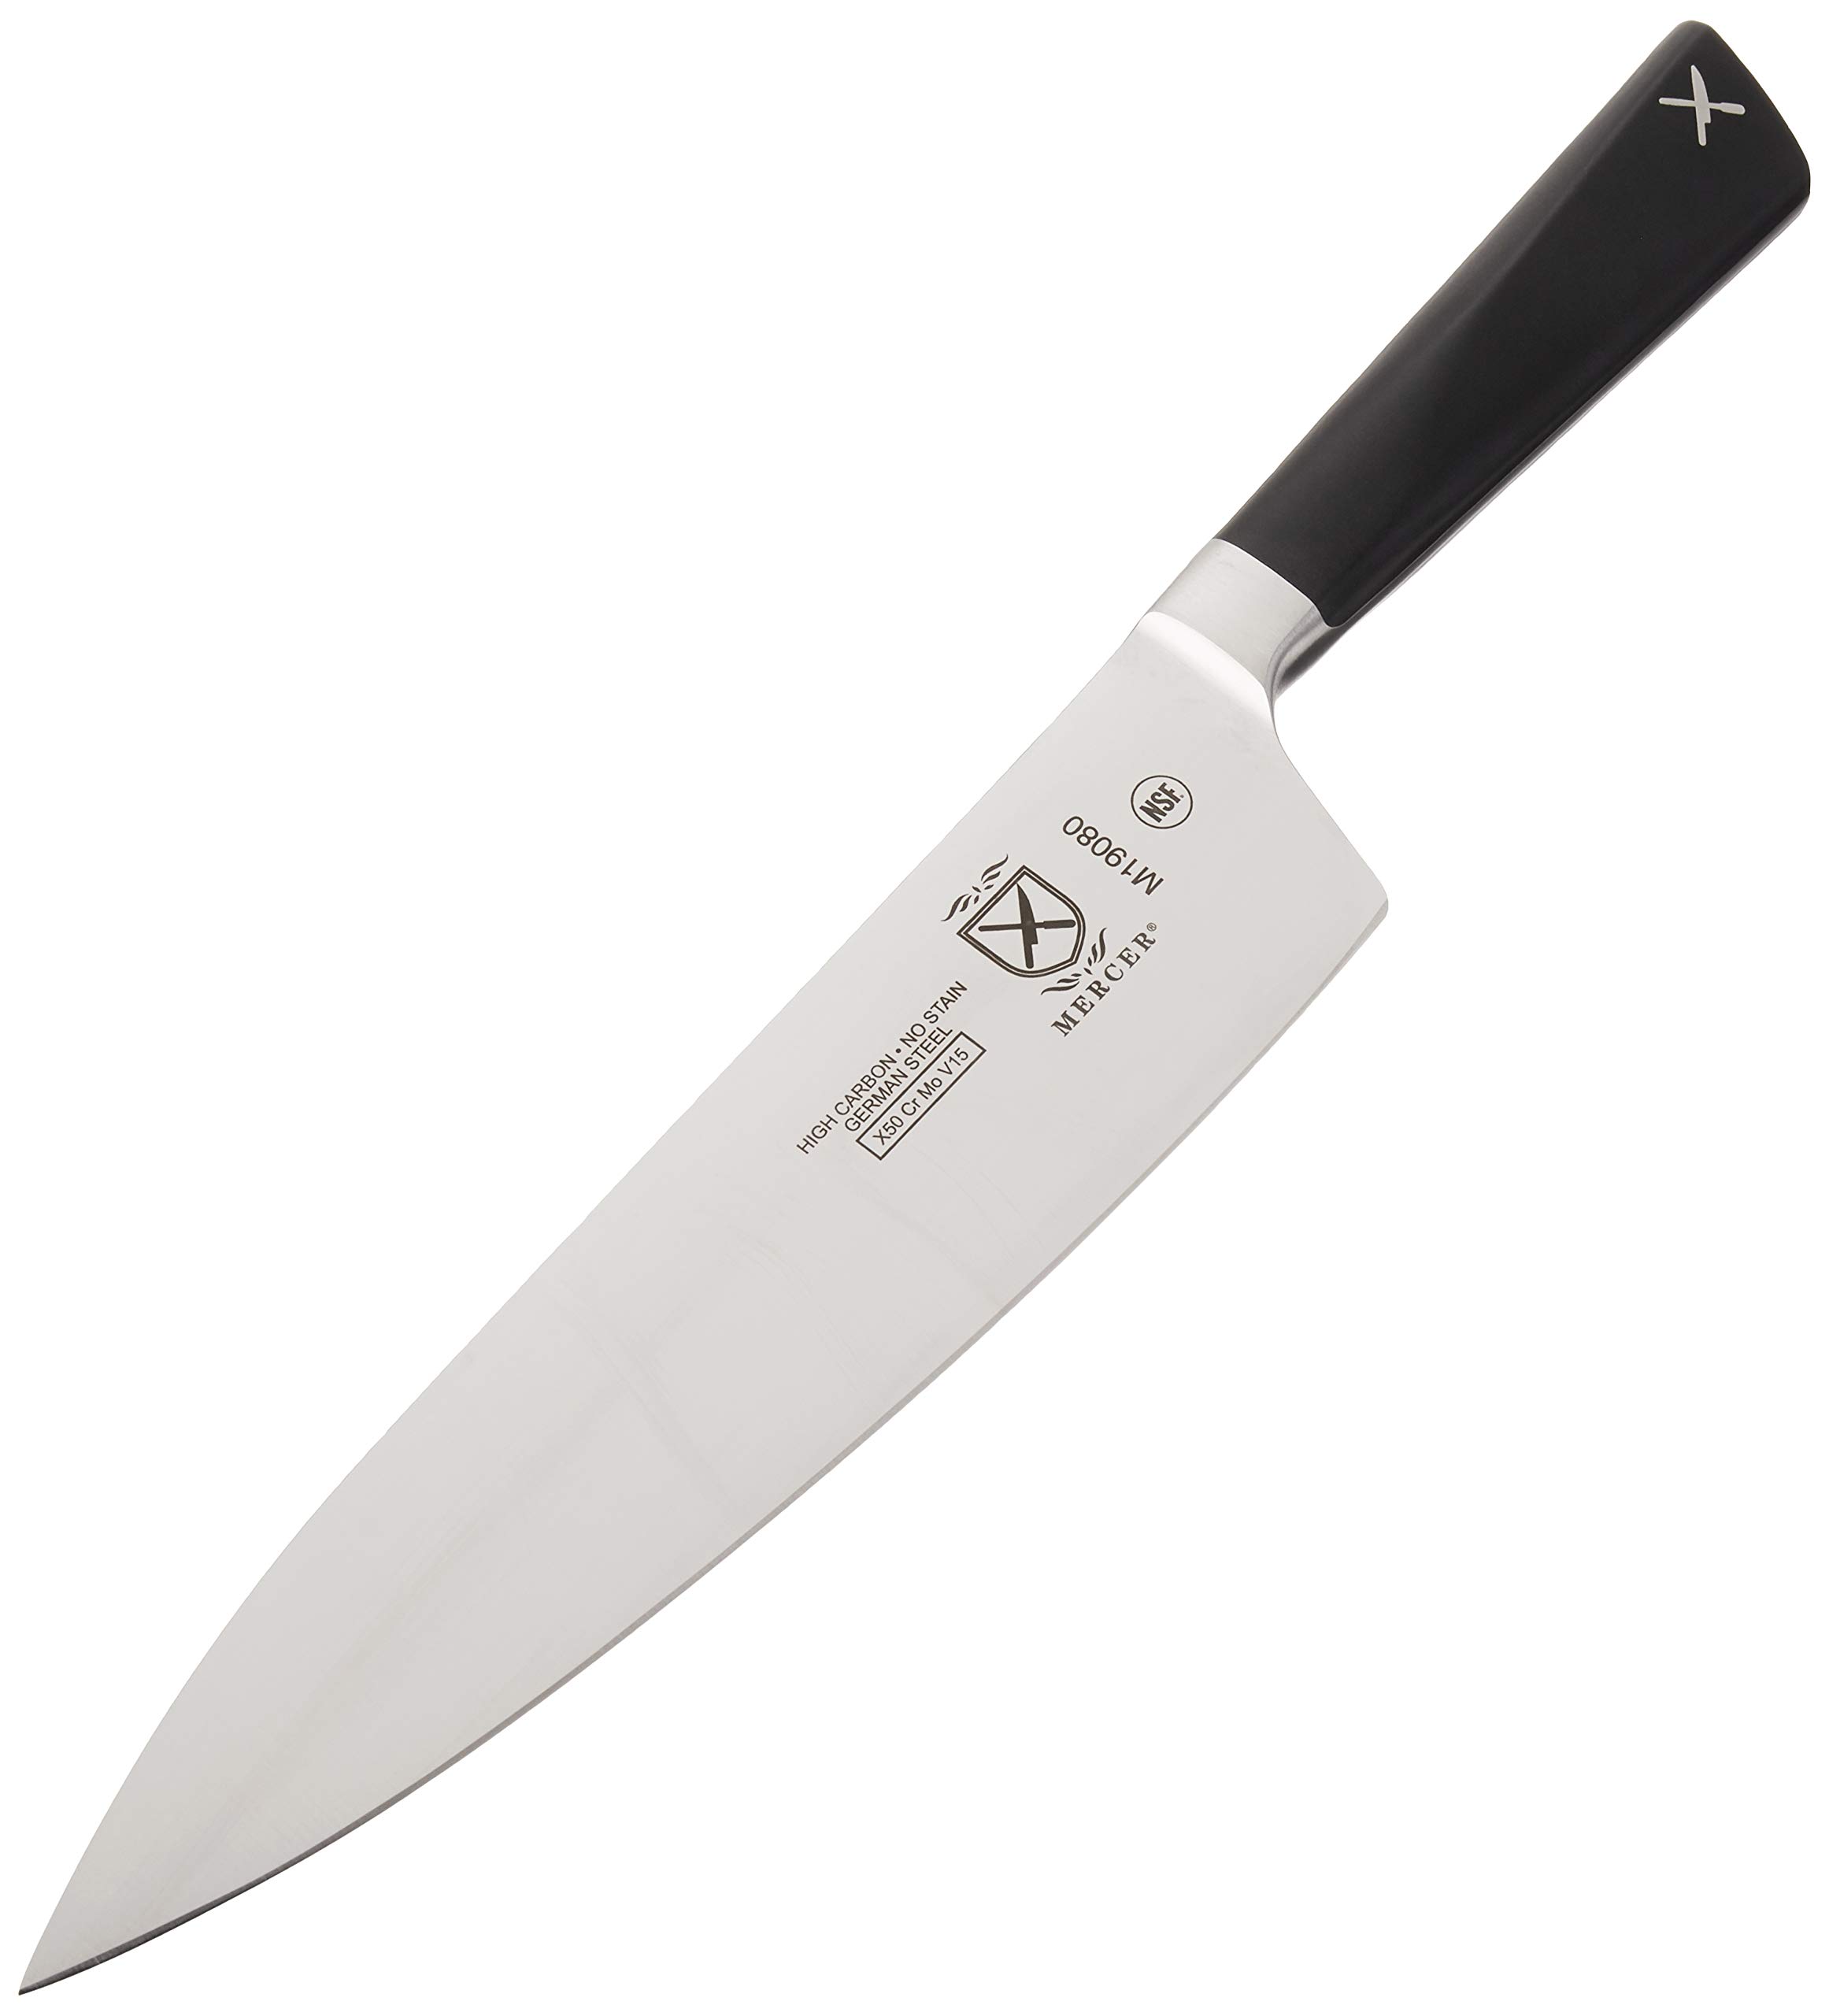 Mercer Culinary Züm Forged Chef's Knife, 8 Inch